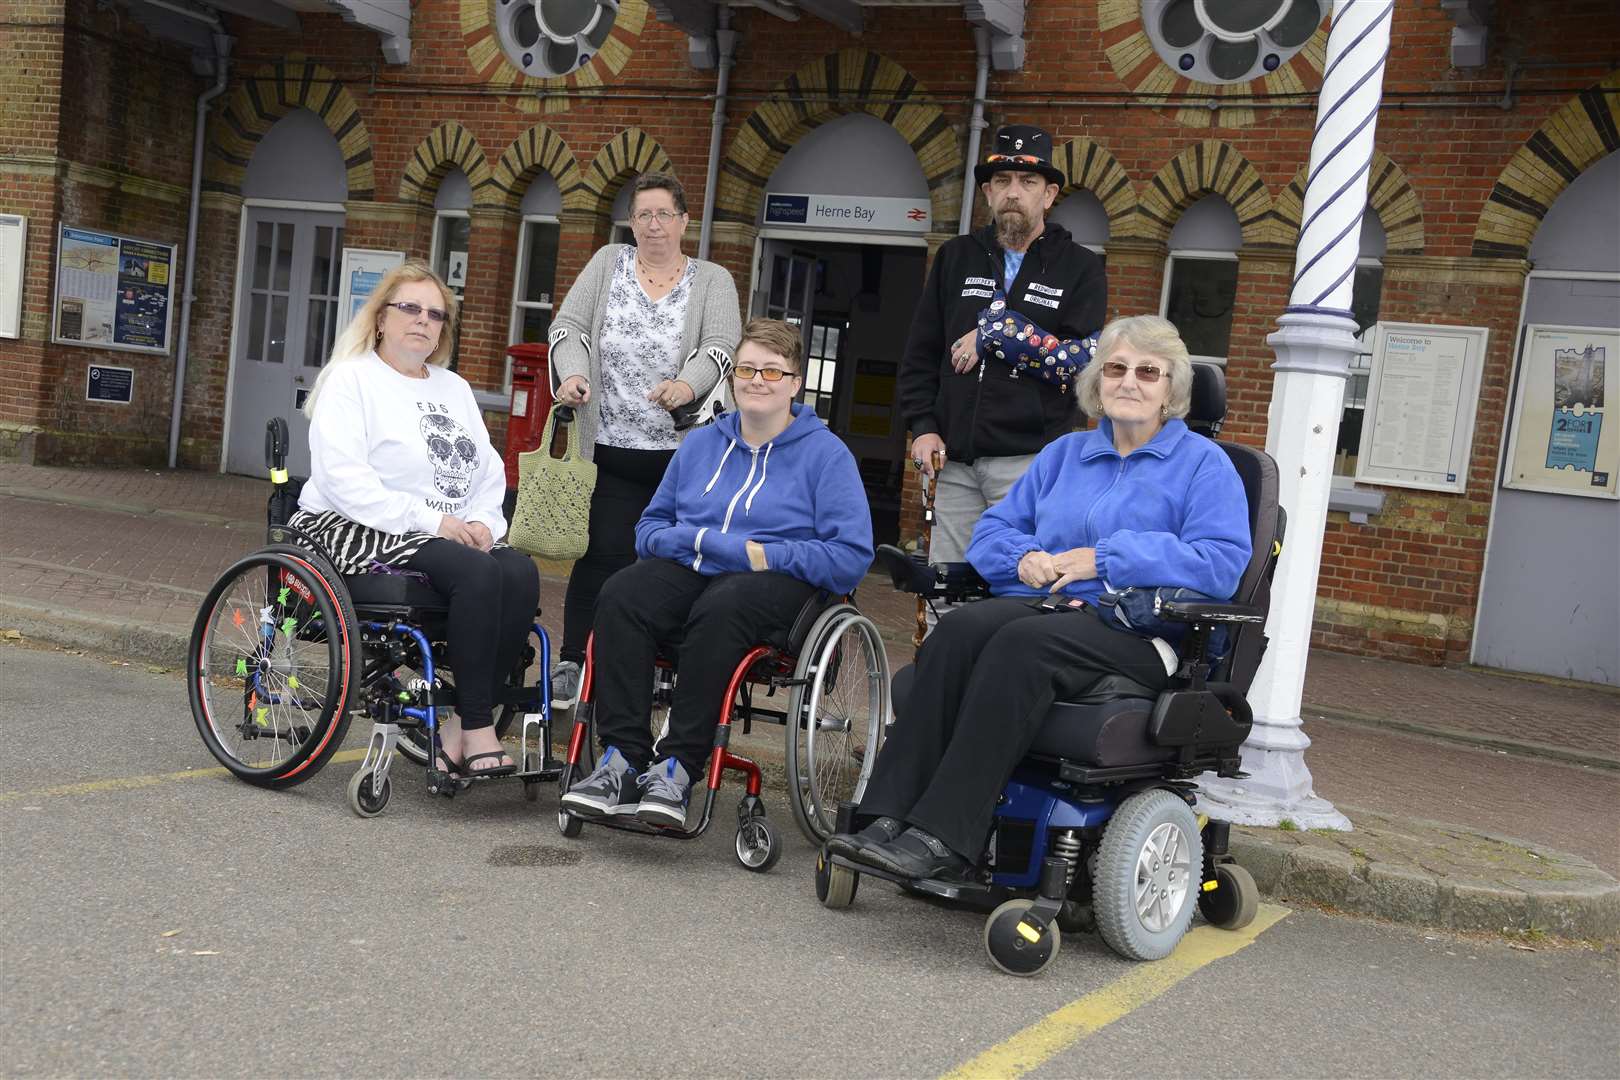 Commuters Jacky Woods, Louise Lavell, Layla Parson, Craig Foster and Sheila Appleton outside Herne Bay station